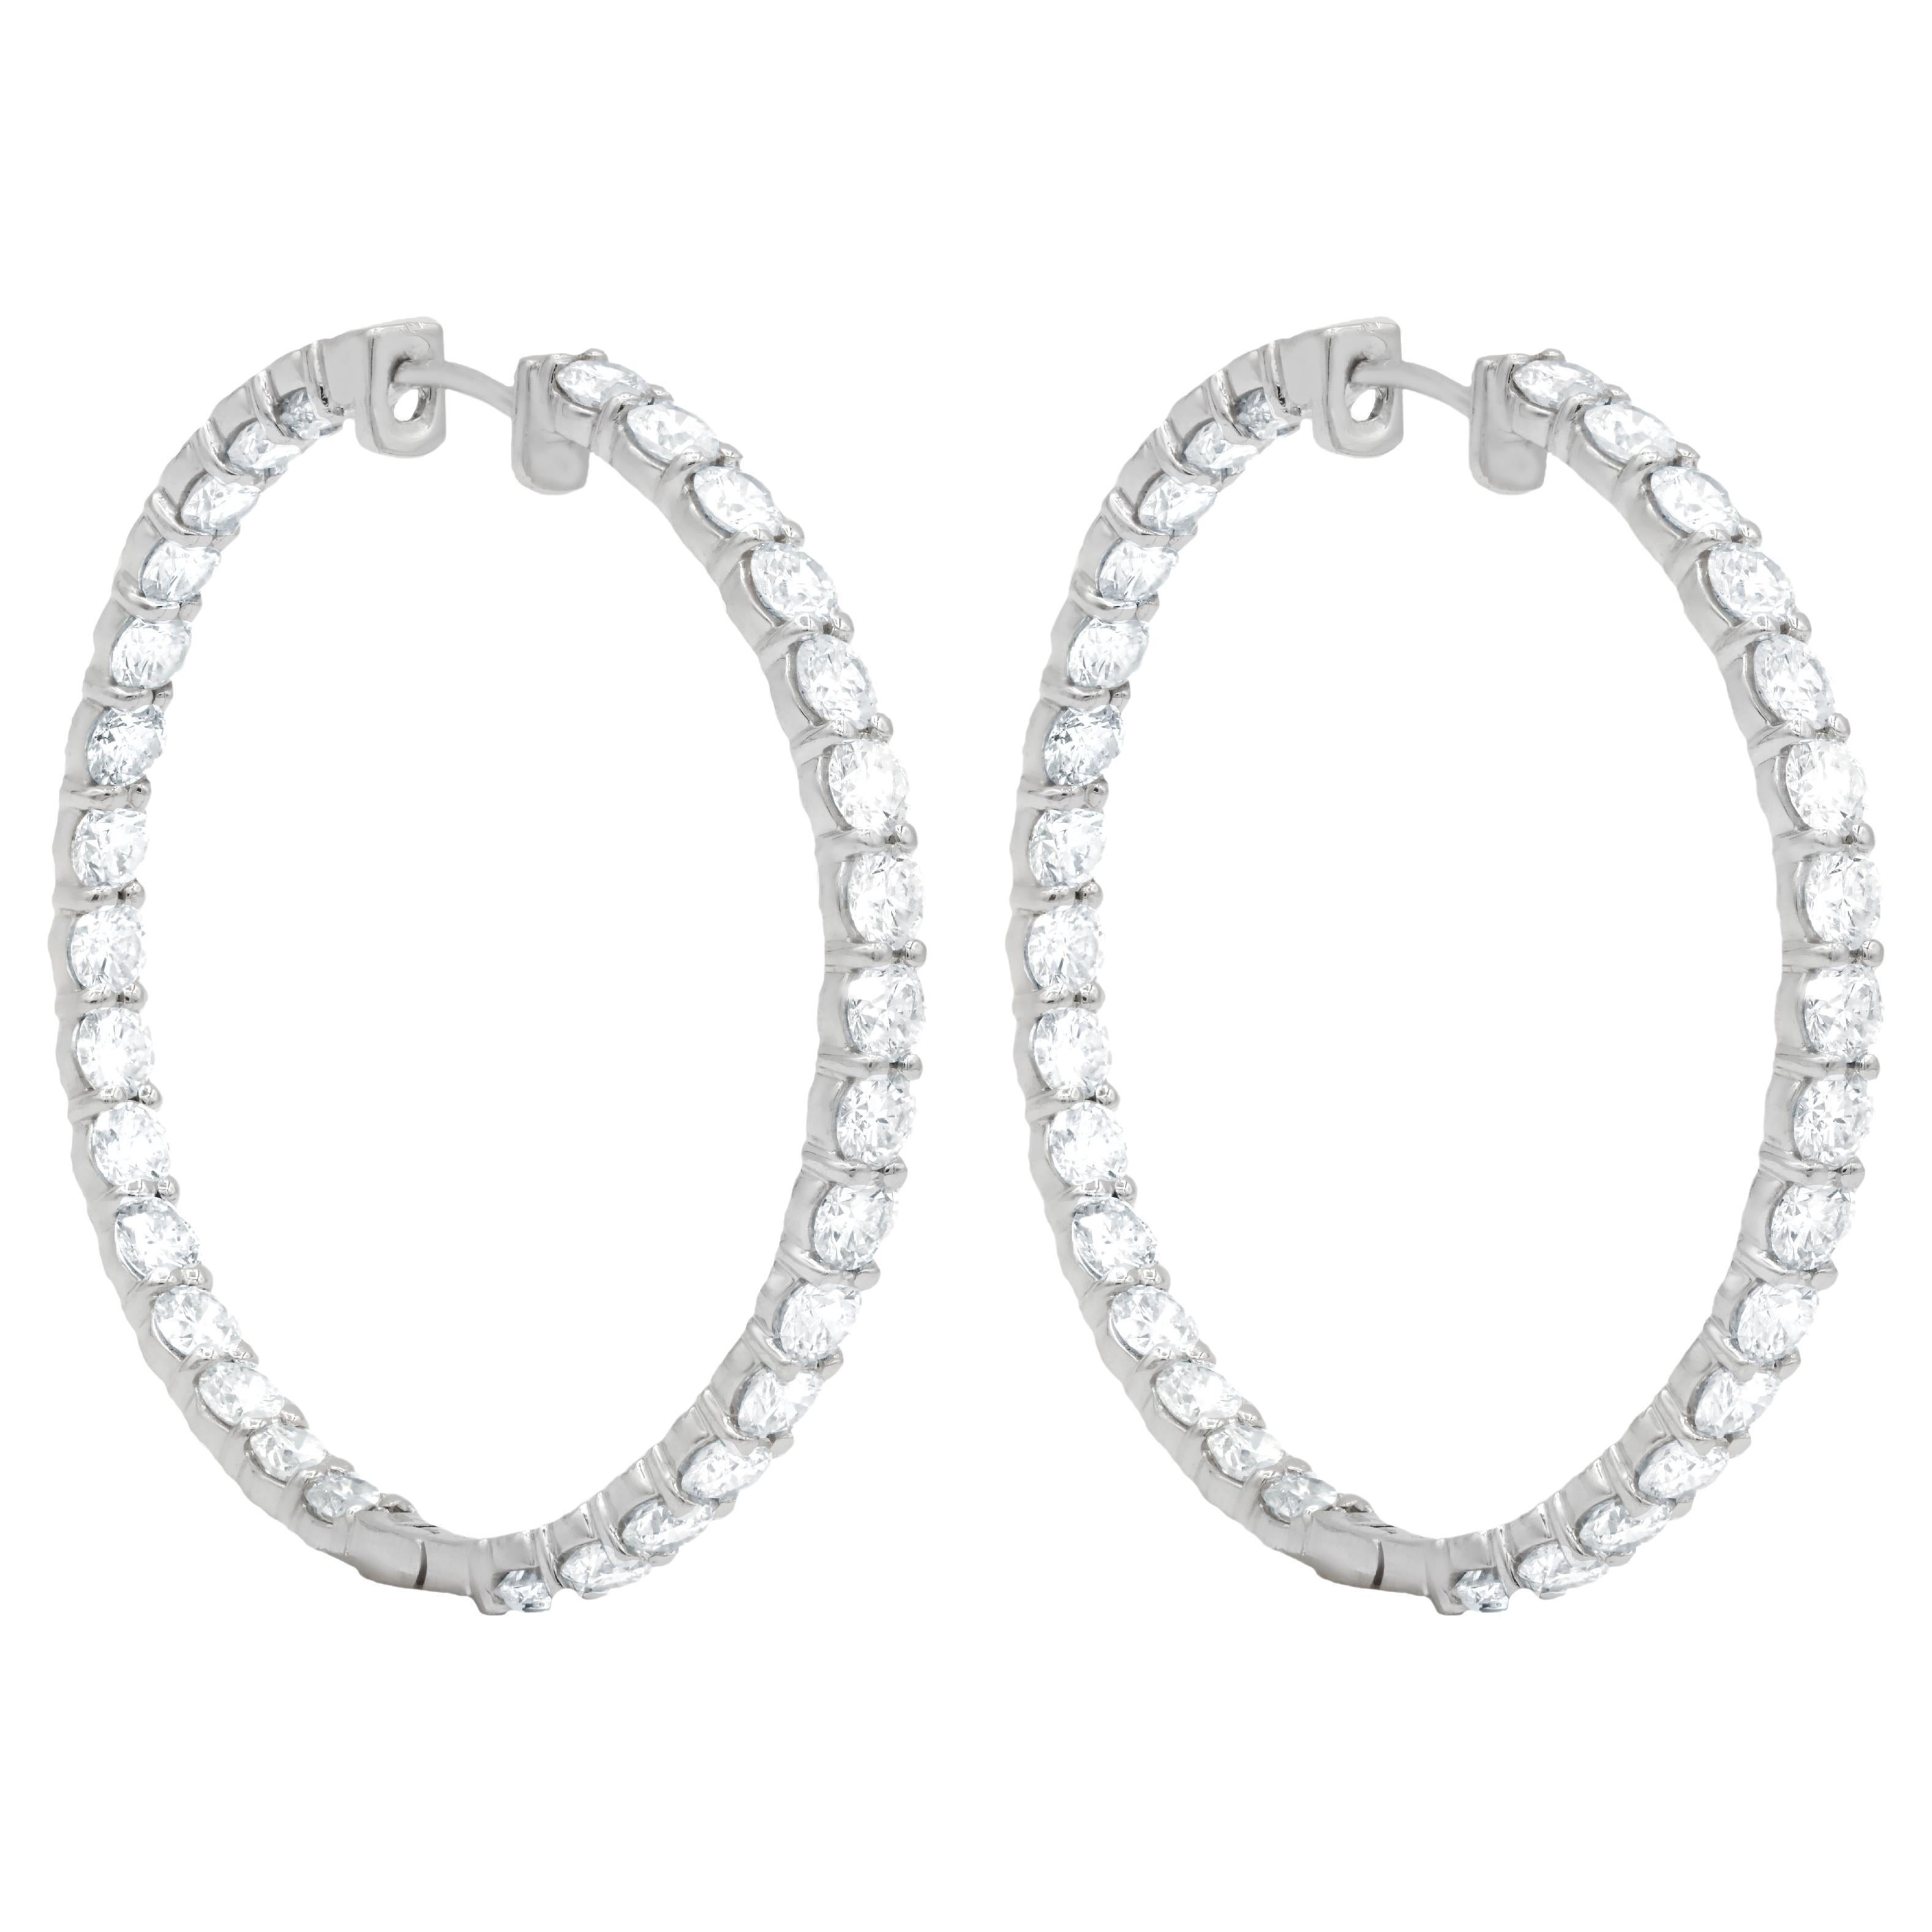 Diana M. 18 kt white gold inside-out hoop earrings adorned with 15.60 cts